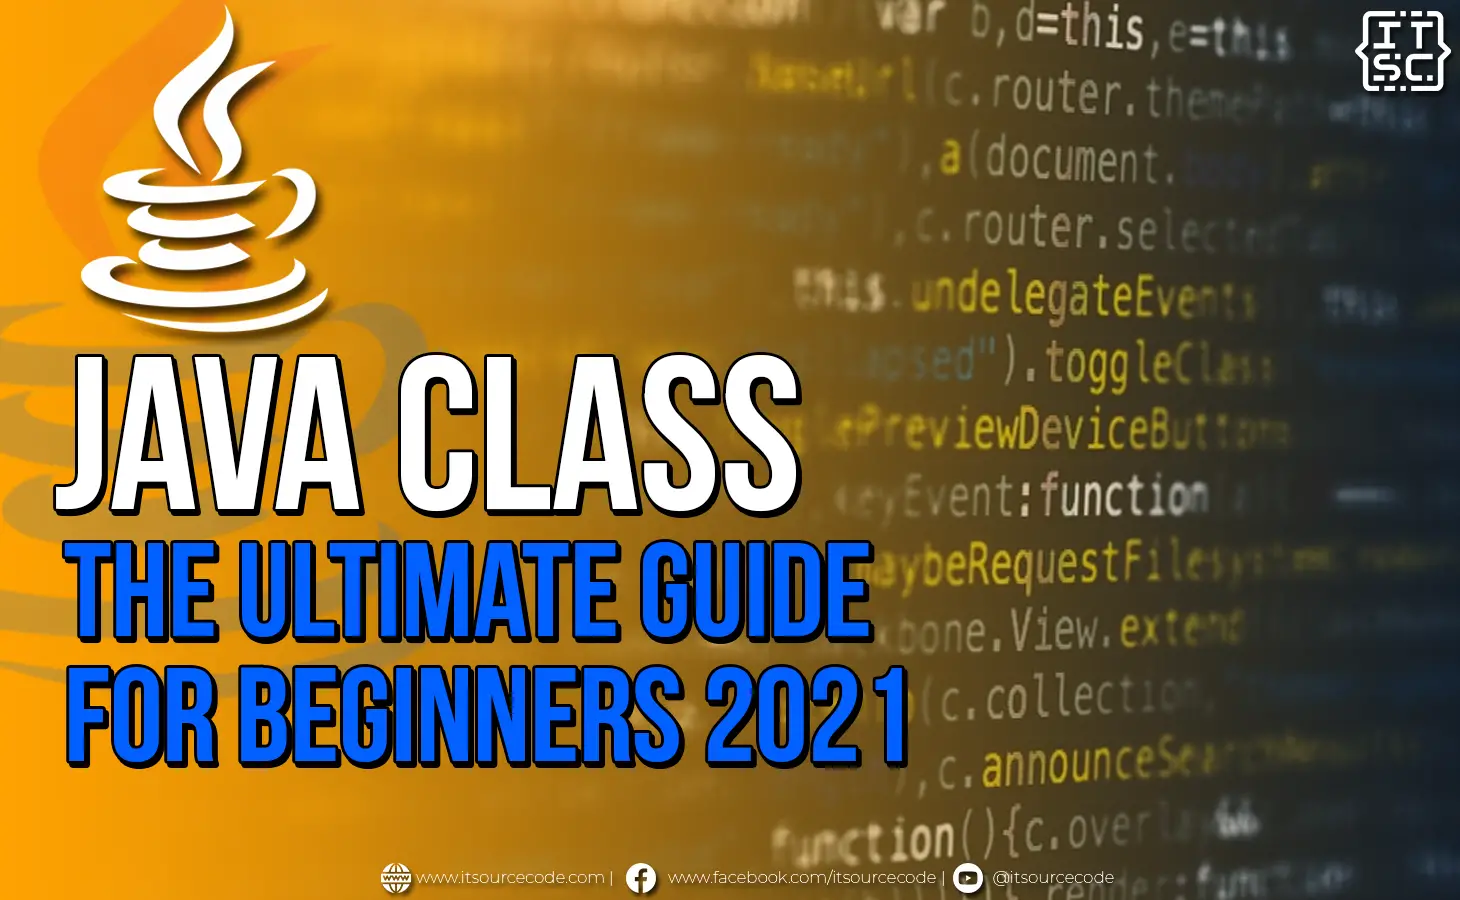 Java Class - The Ultimate Guide For Beginners 2021